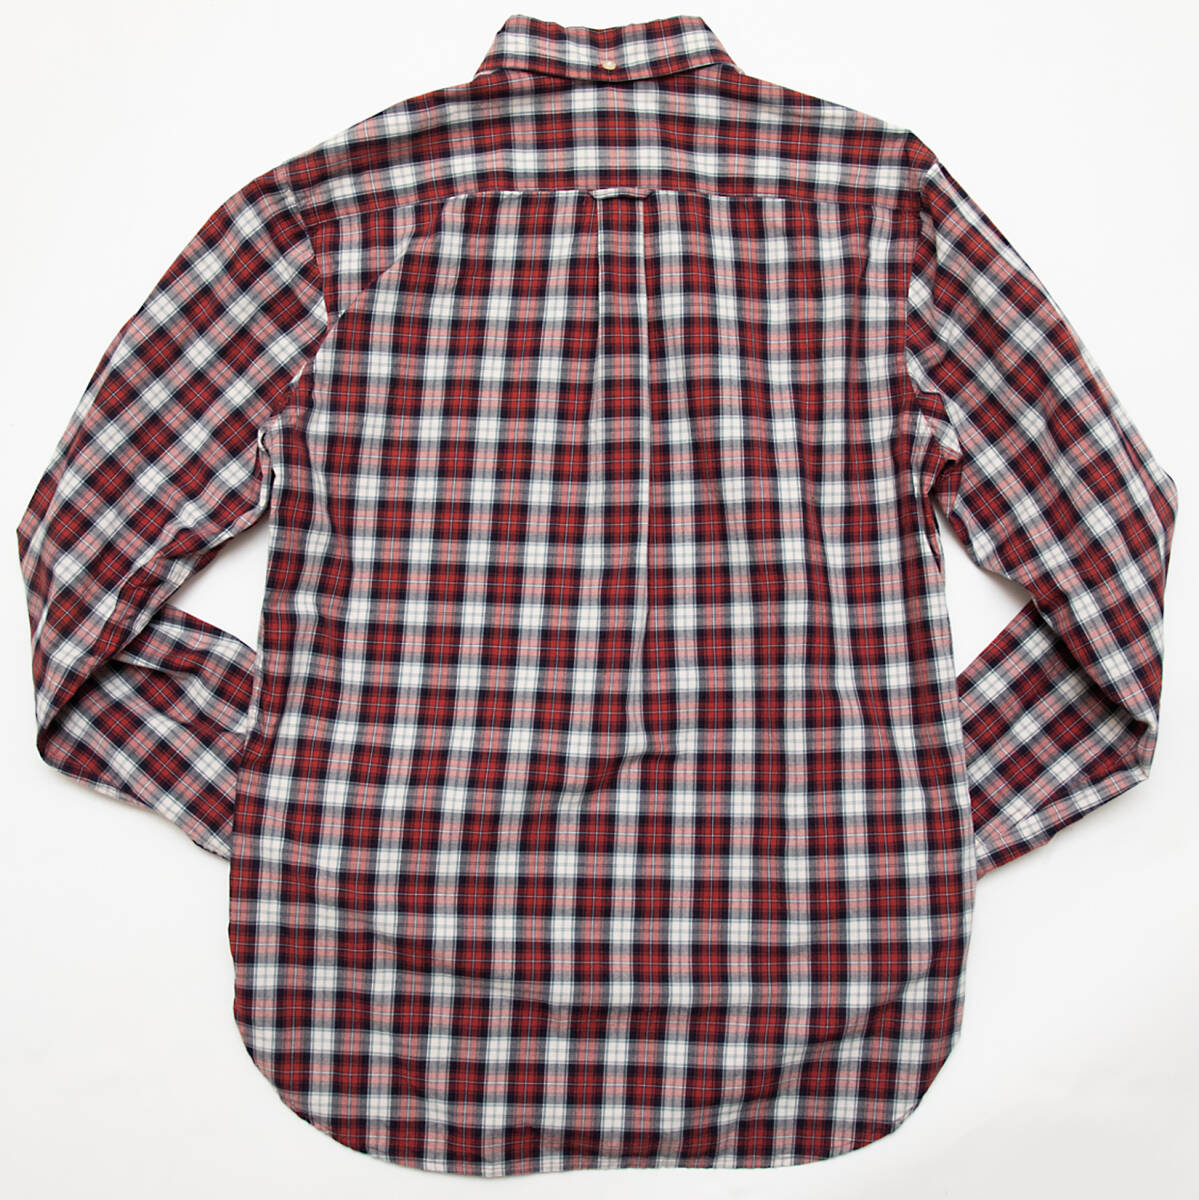 S/DOUBLEes double shirt size M button down check STUSSY Sean Stussy BEAMS Ron Herman used